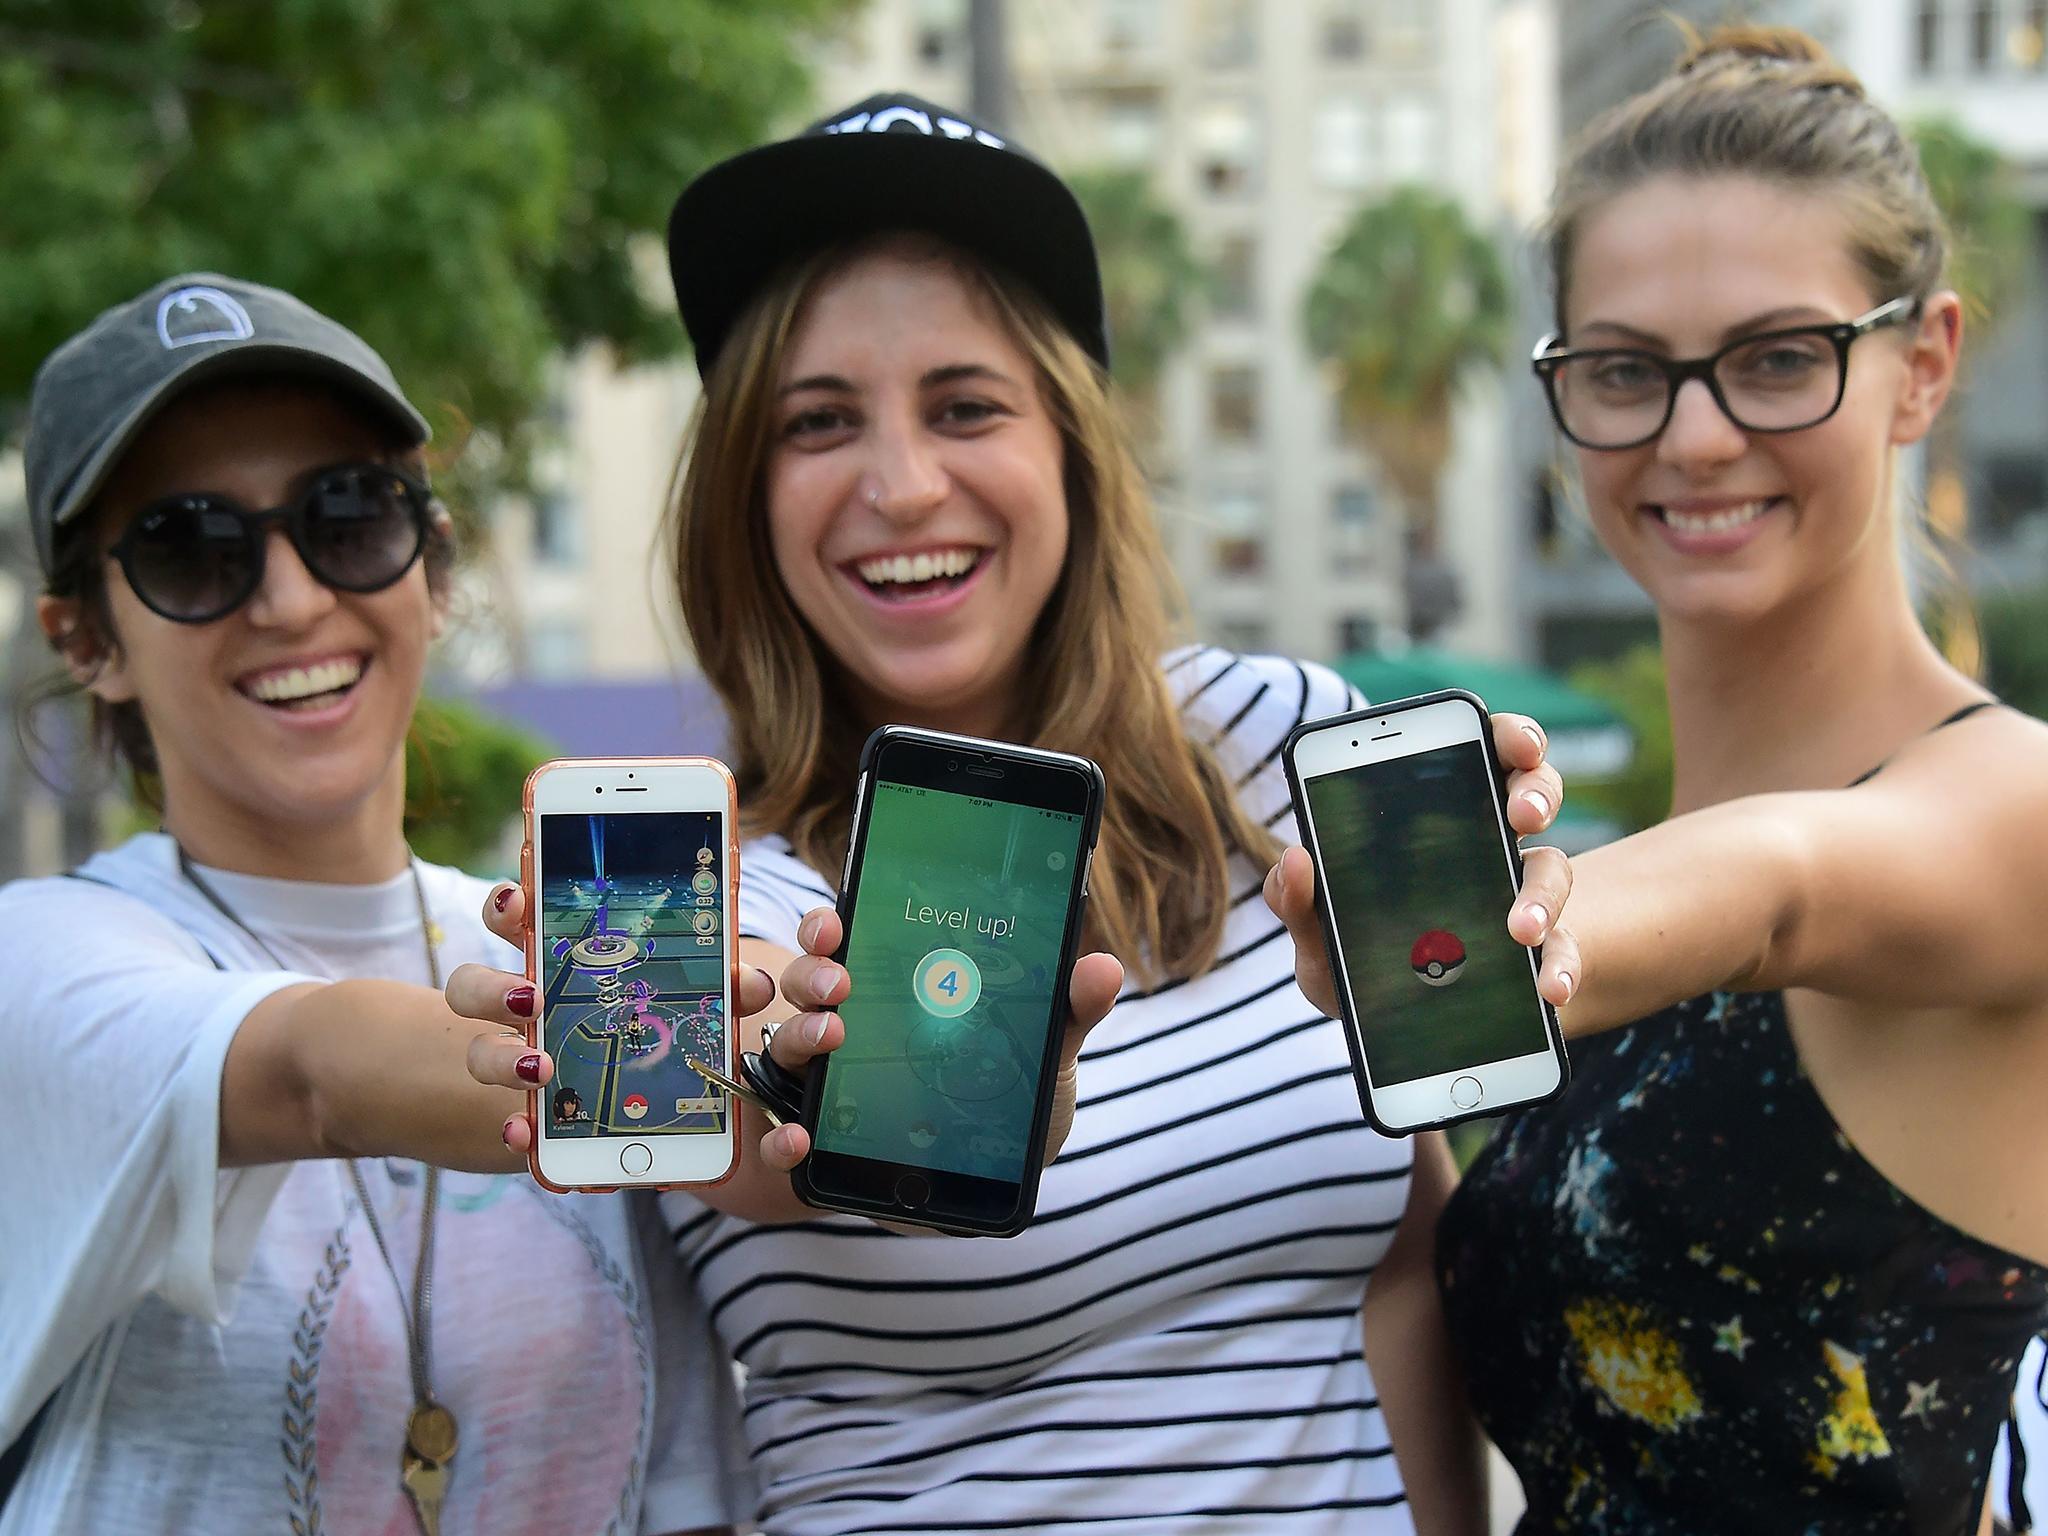 Three Pokemon Go enthusiasts display their cellphones while playing Pokemon Go on July 13, 2016 at Pershing Square in Los Angeles, California